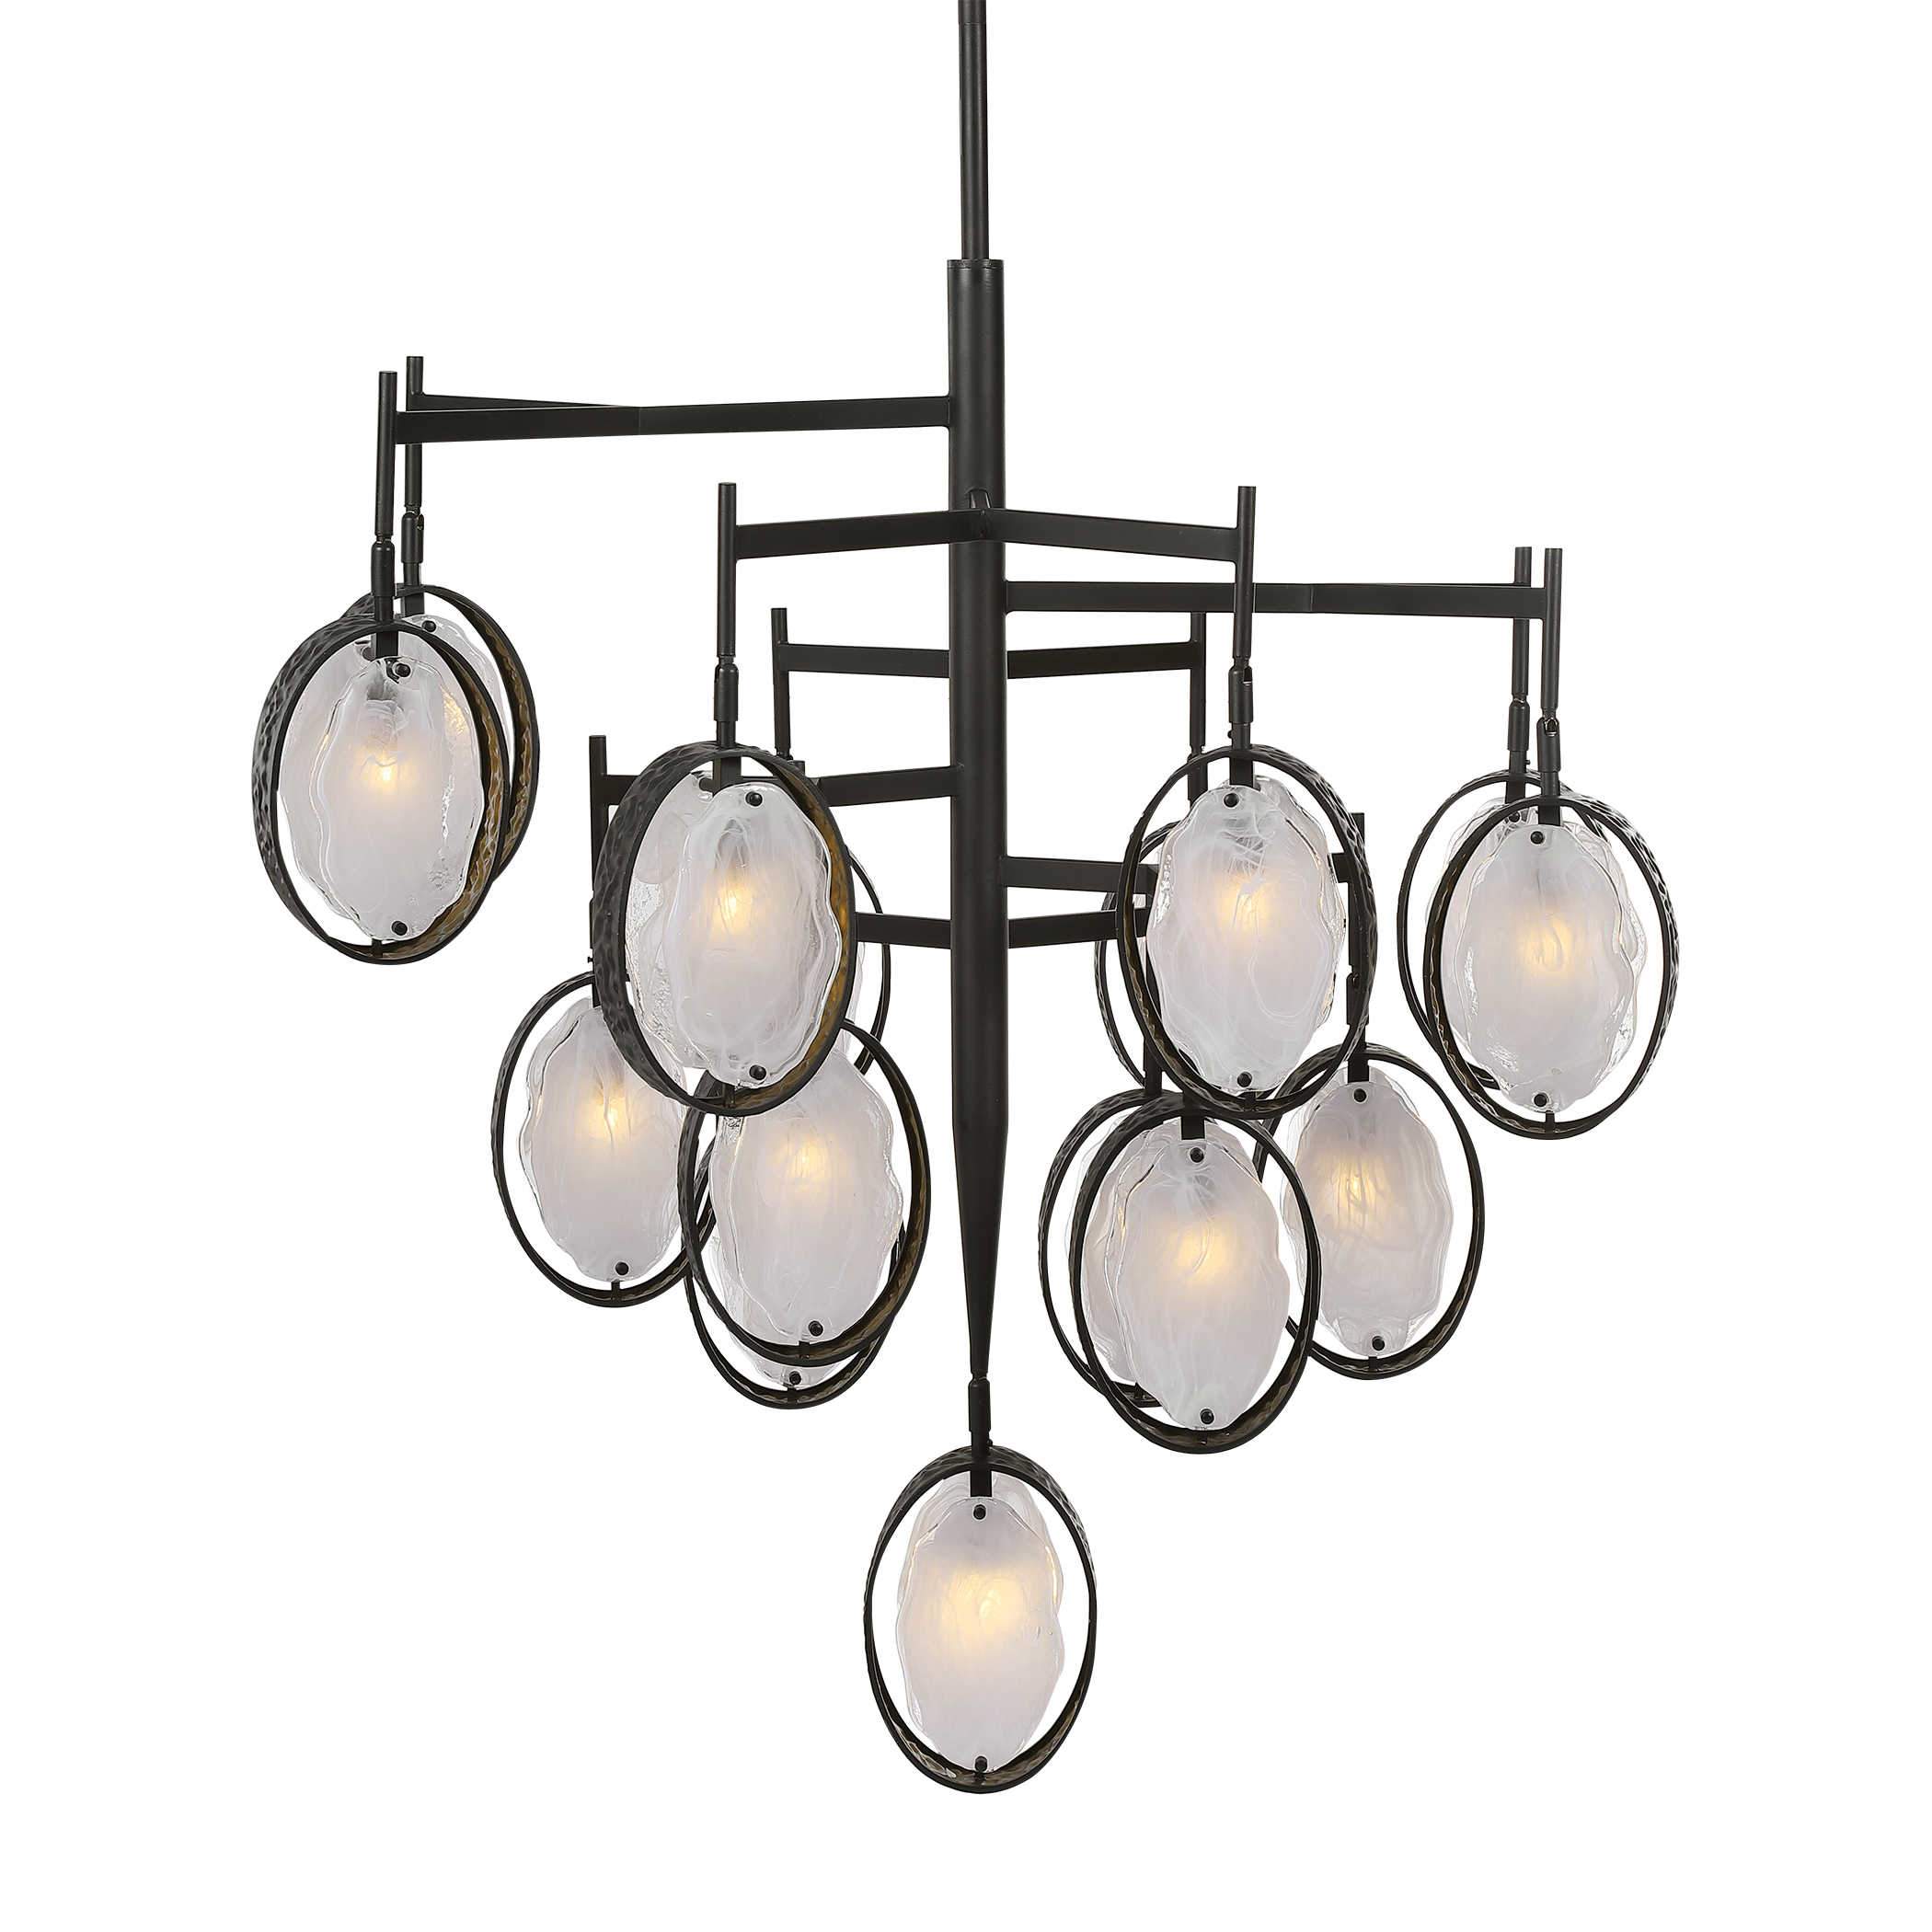 Uttermost Lighting Motor Freight - Rate to be Quoted Uttermost Maxin, 15 Lt. Large Chandelier